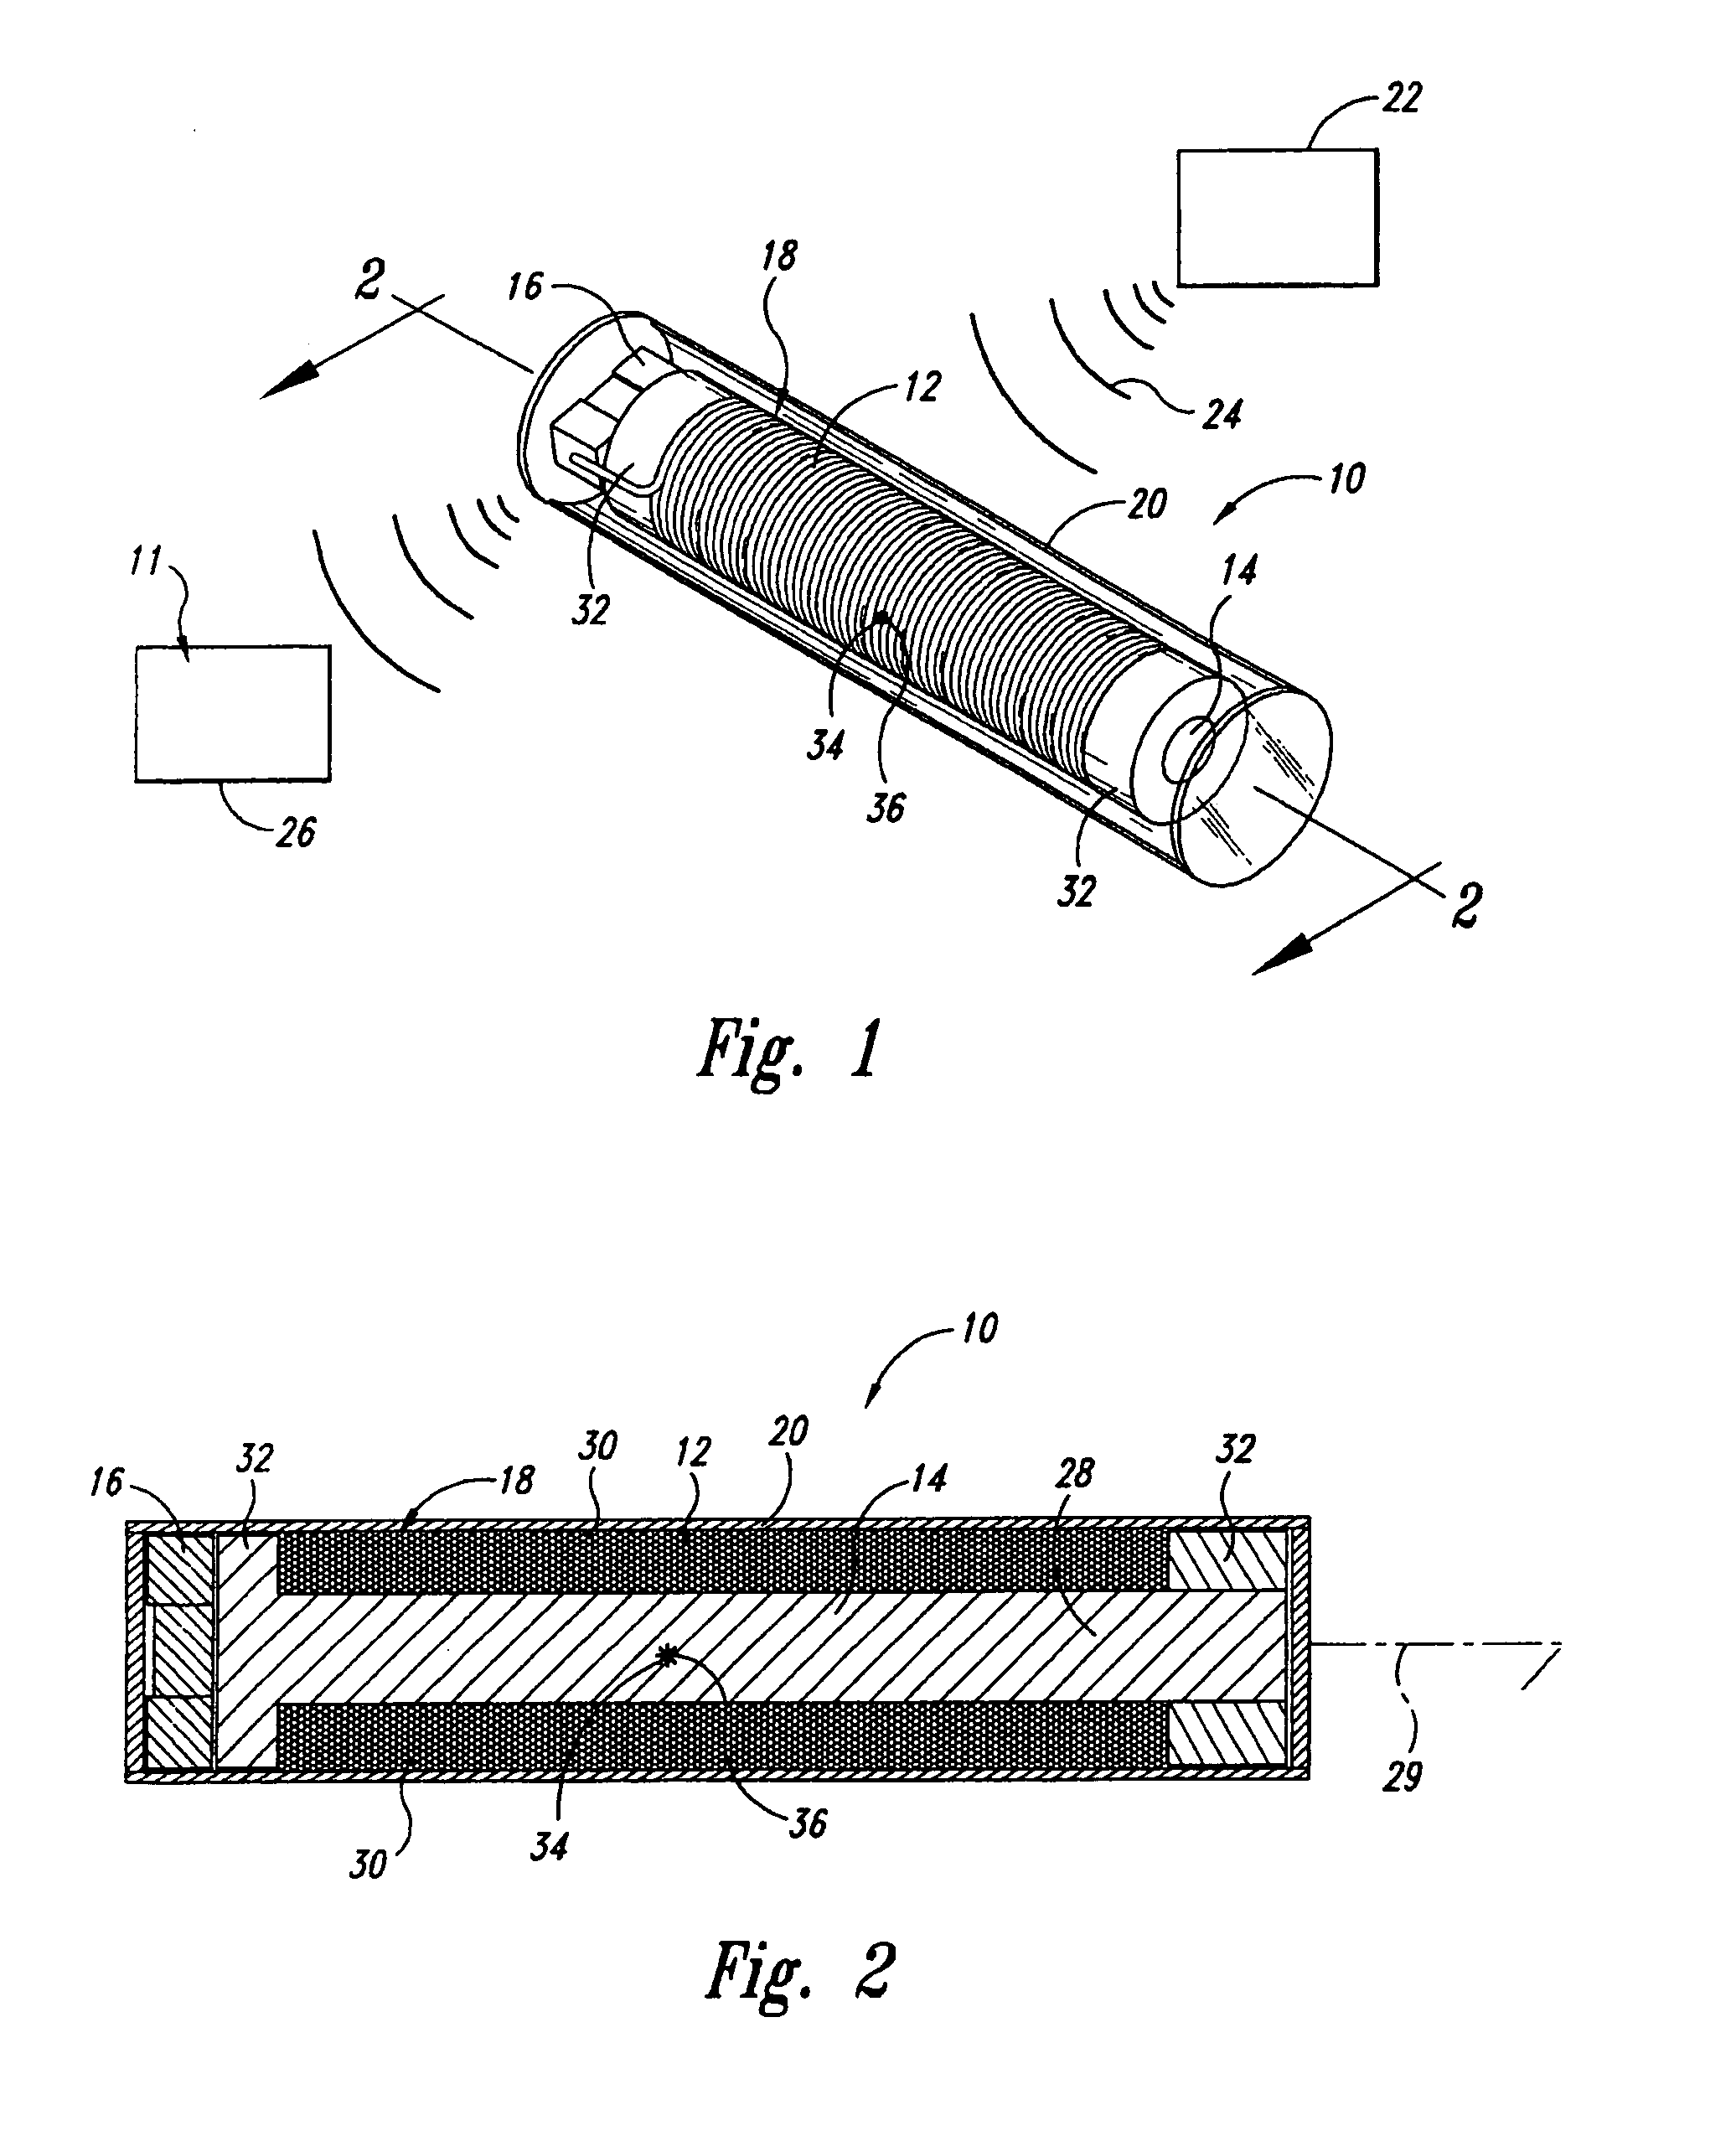 Miniature resonating marker assembly